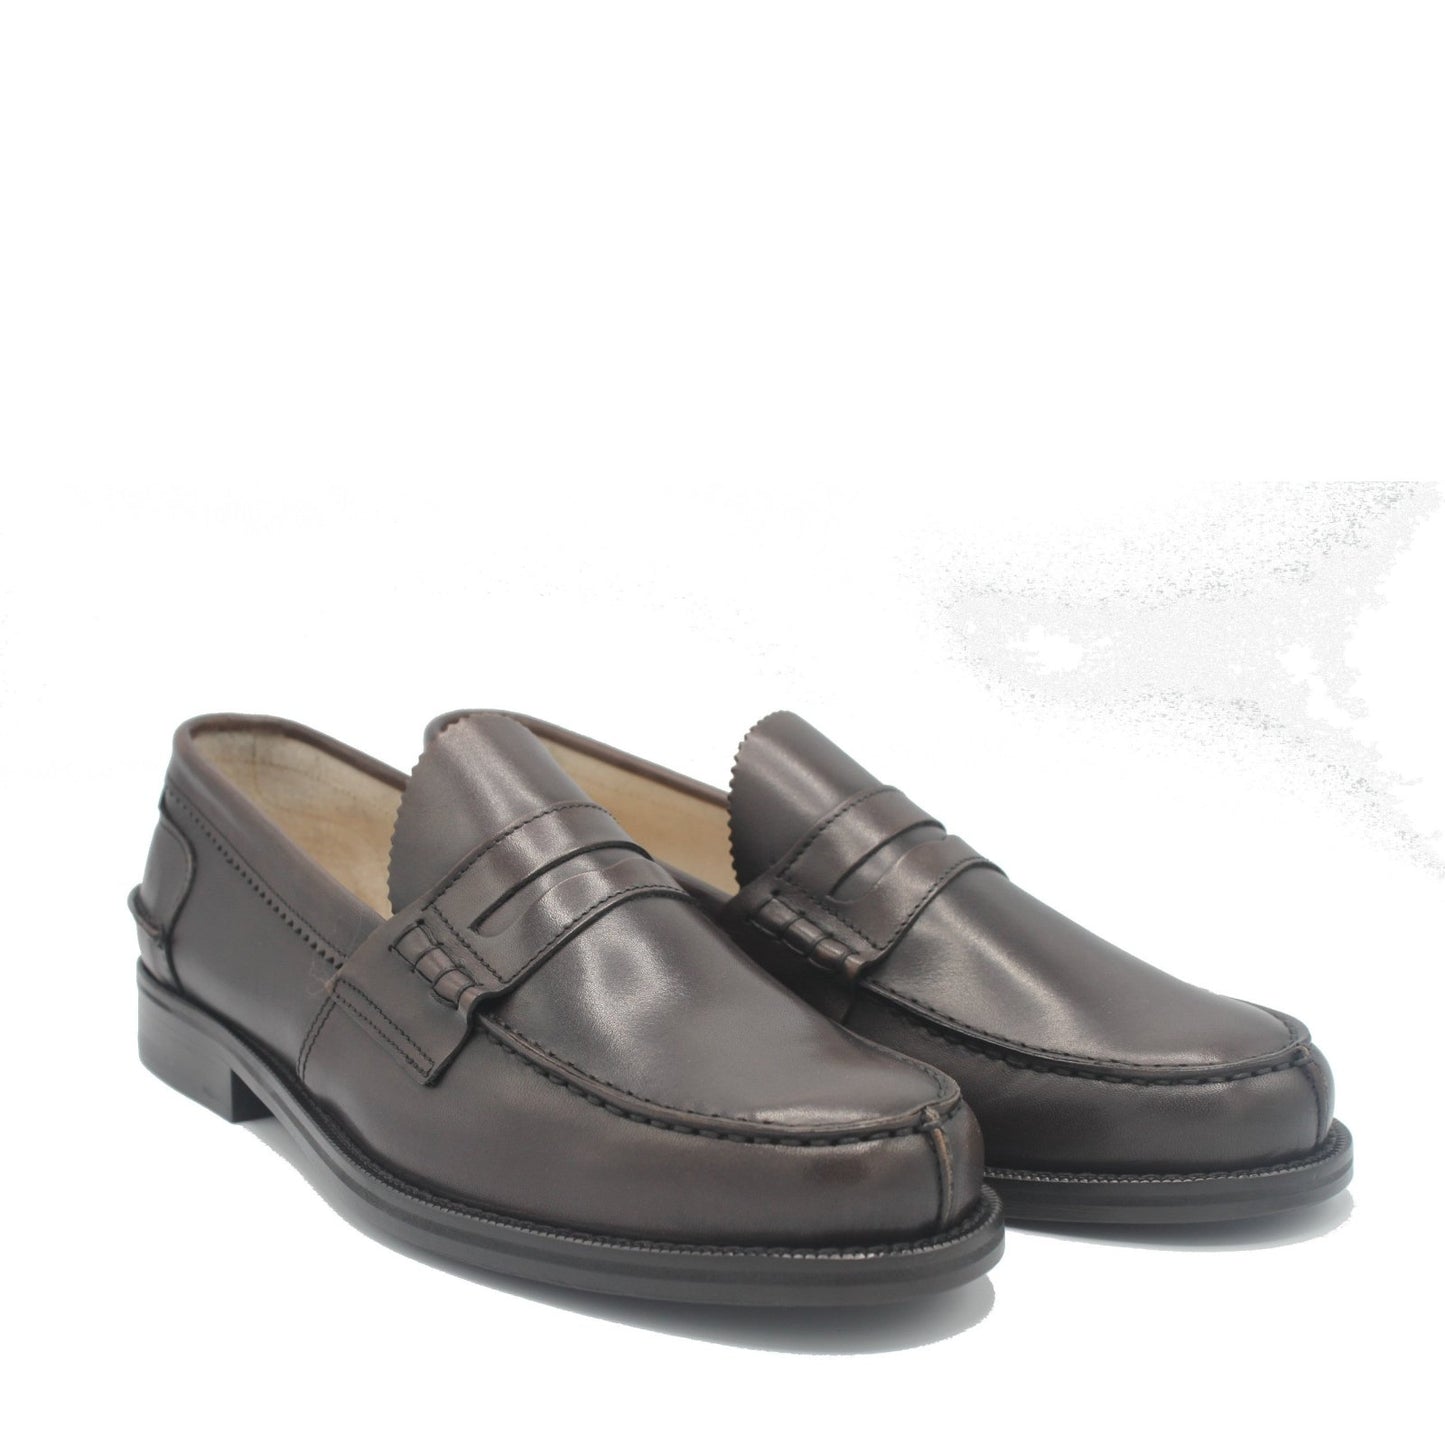 PENNY LOAFER DARK BROWN LEATHER - Saxone of Scotland